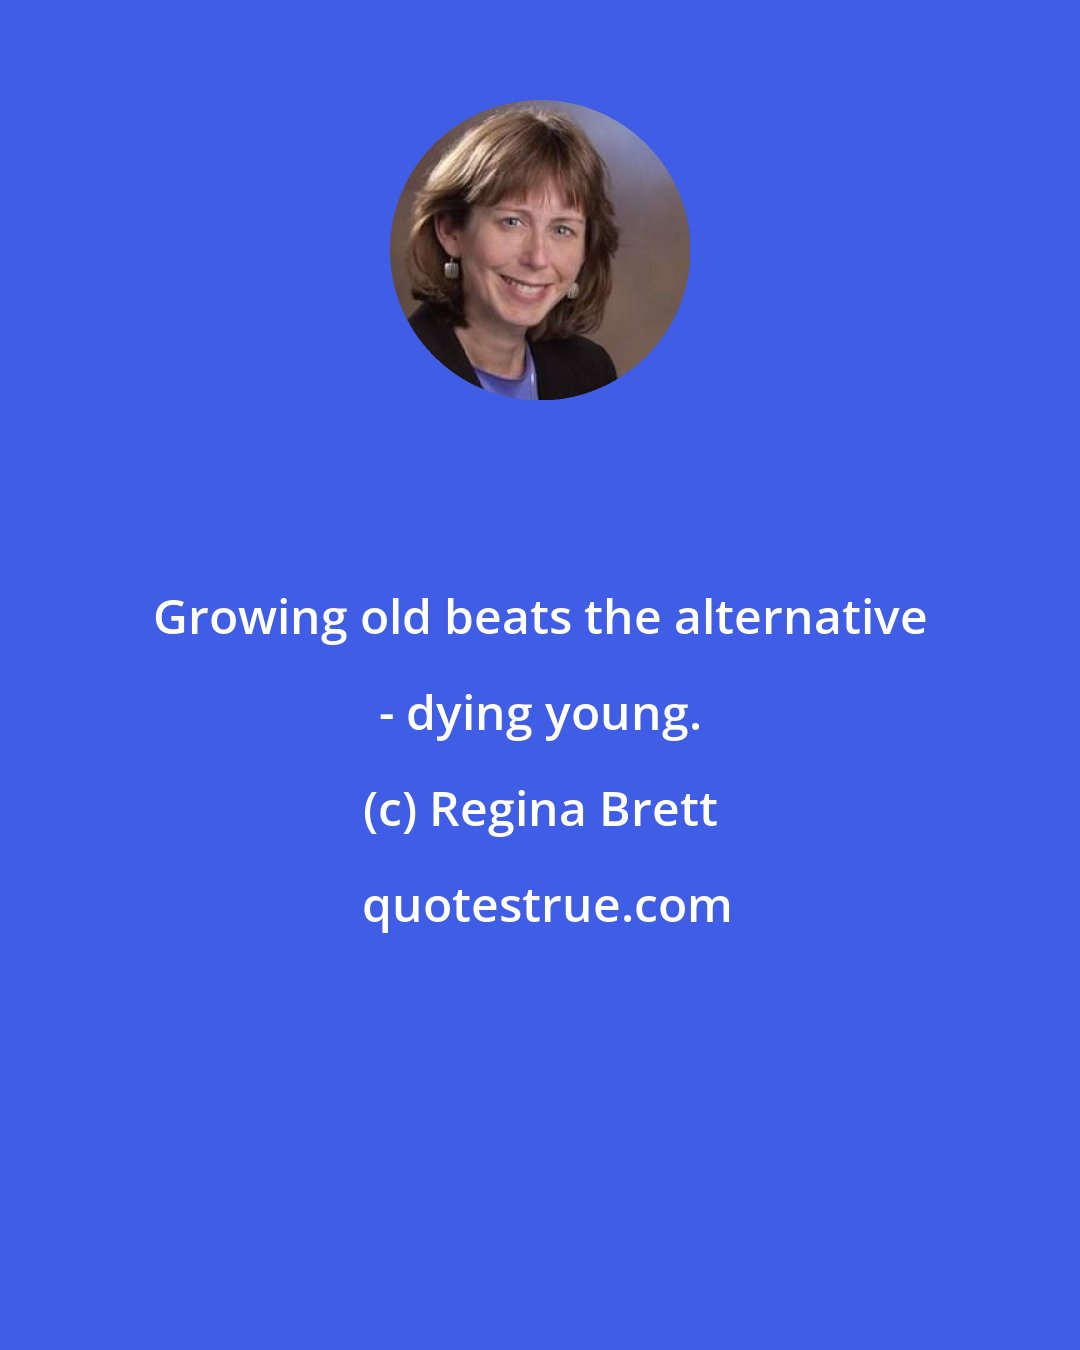 Regina Brett: Growing old beats the alternative - dying young.